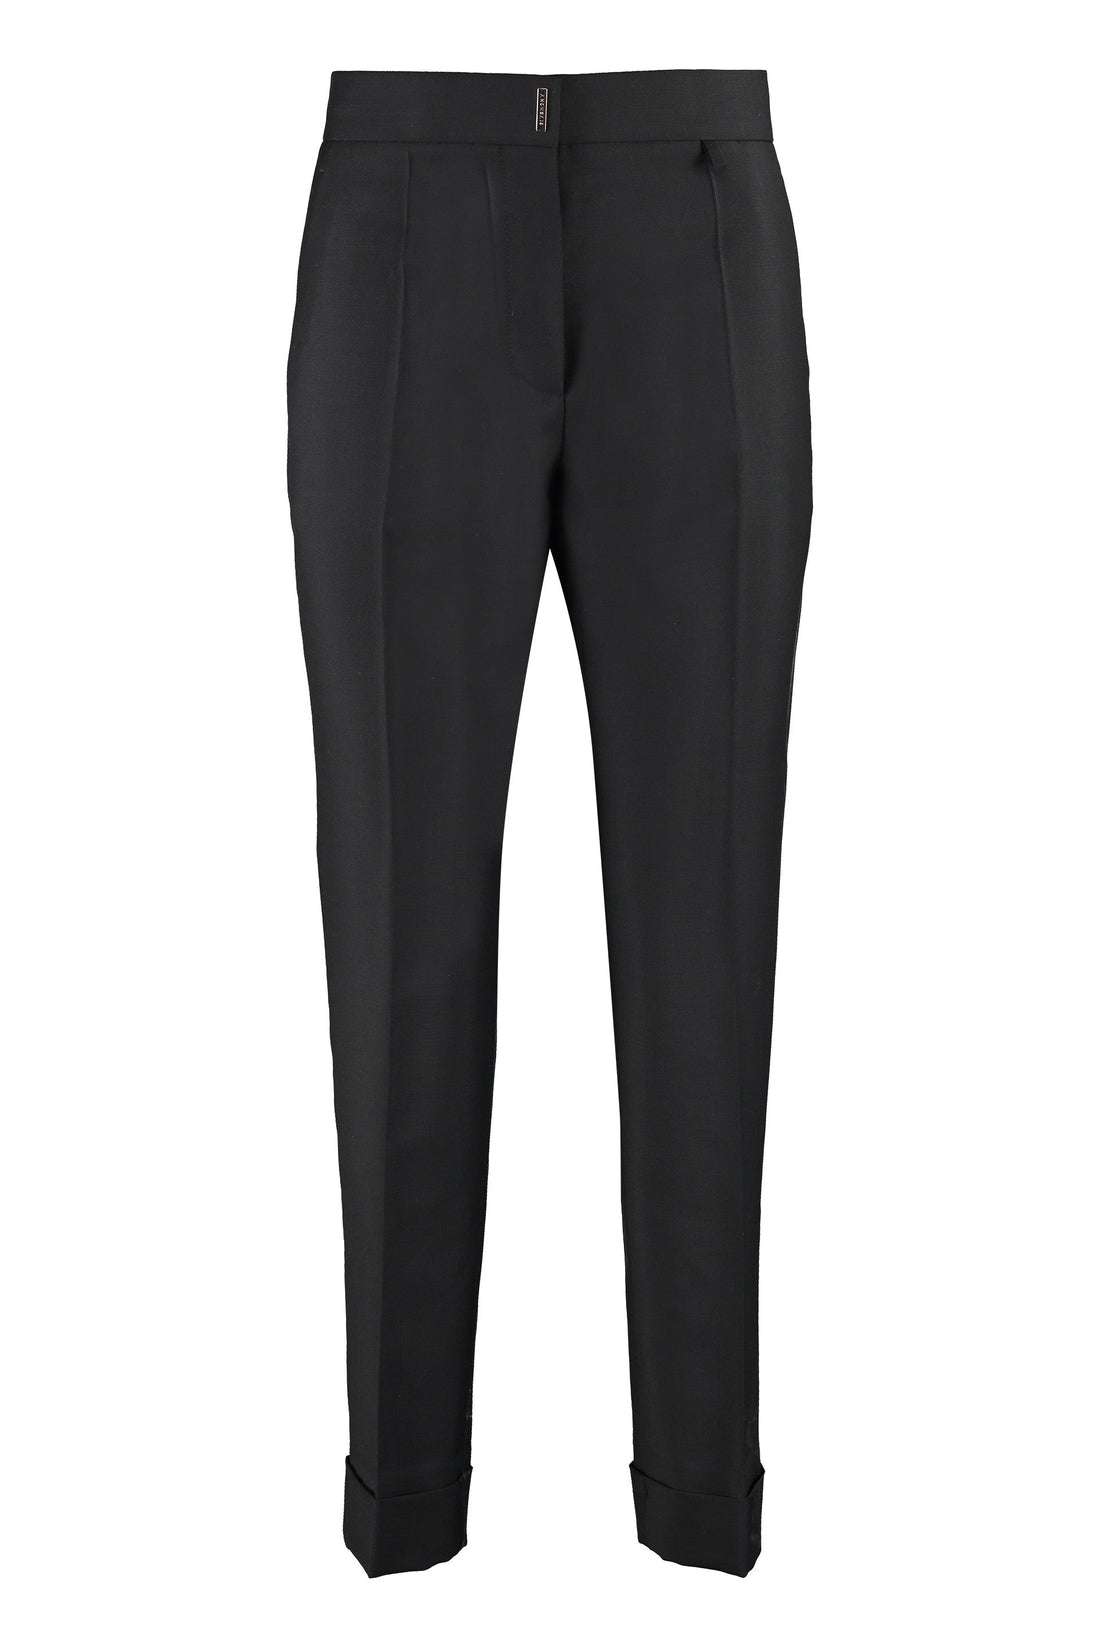 Givenchy-OUTLET-SALE-Wool blend slim fit tailored trousers-ARCHIVIST